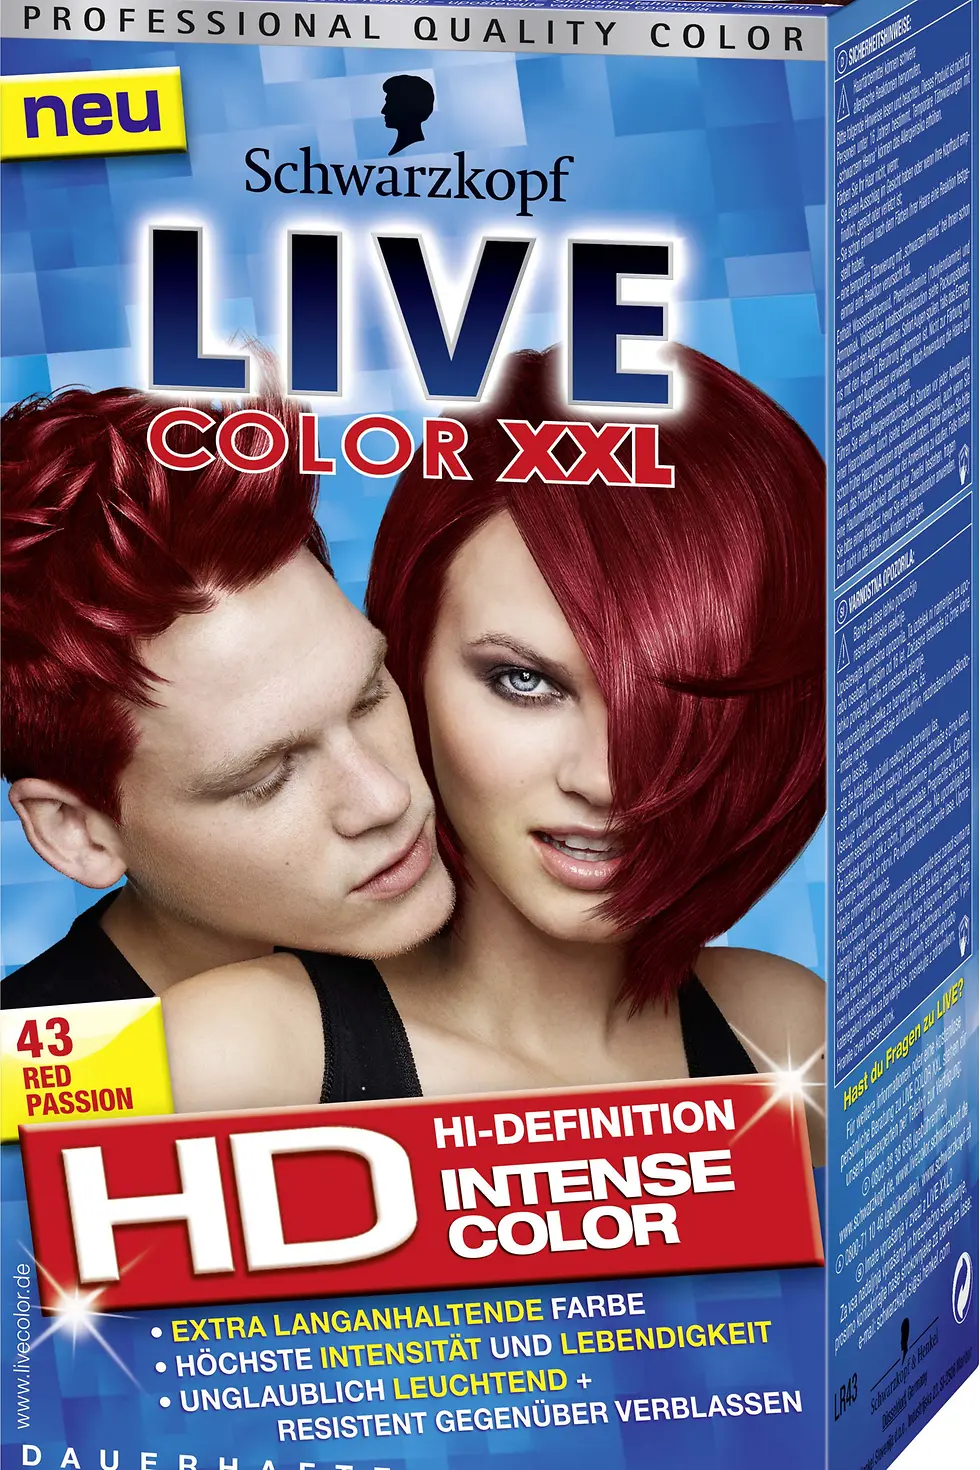 Live Color XXL HD 43 Red Passion